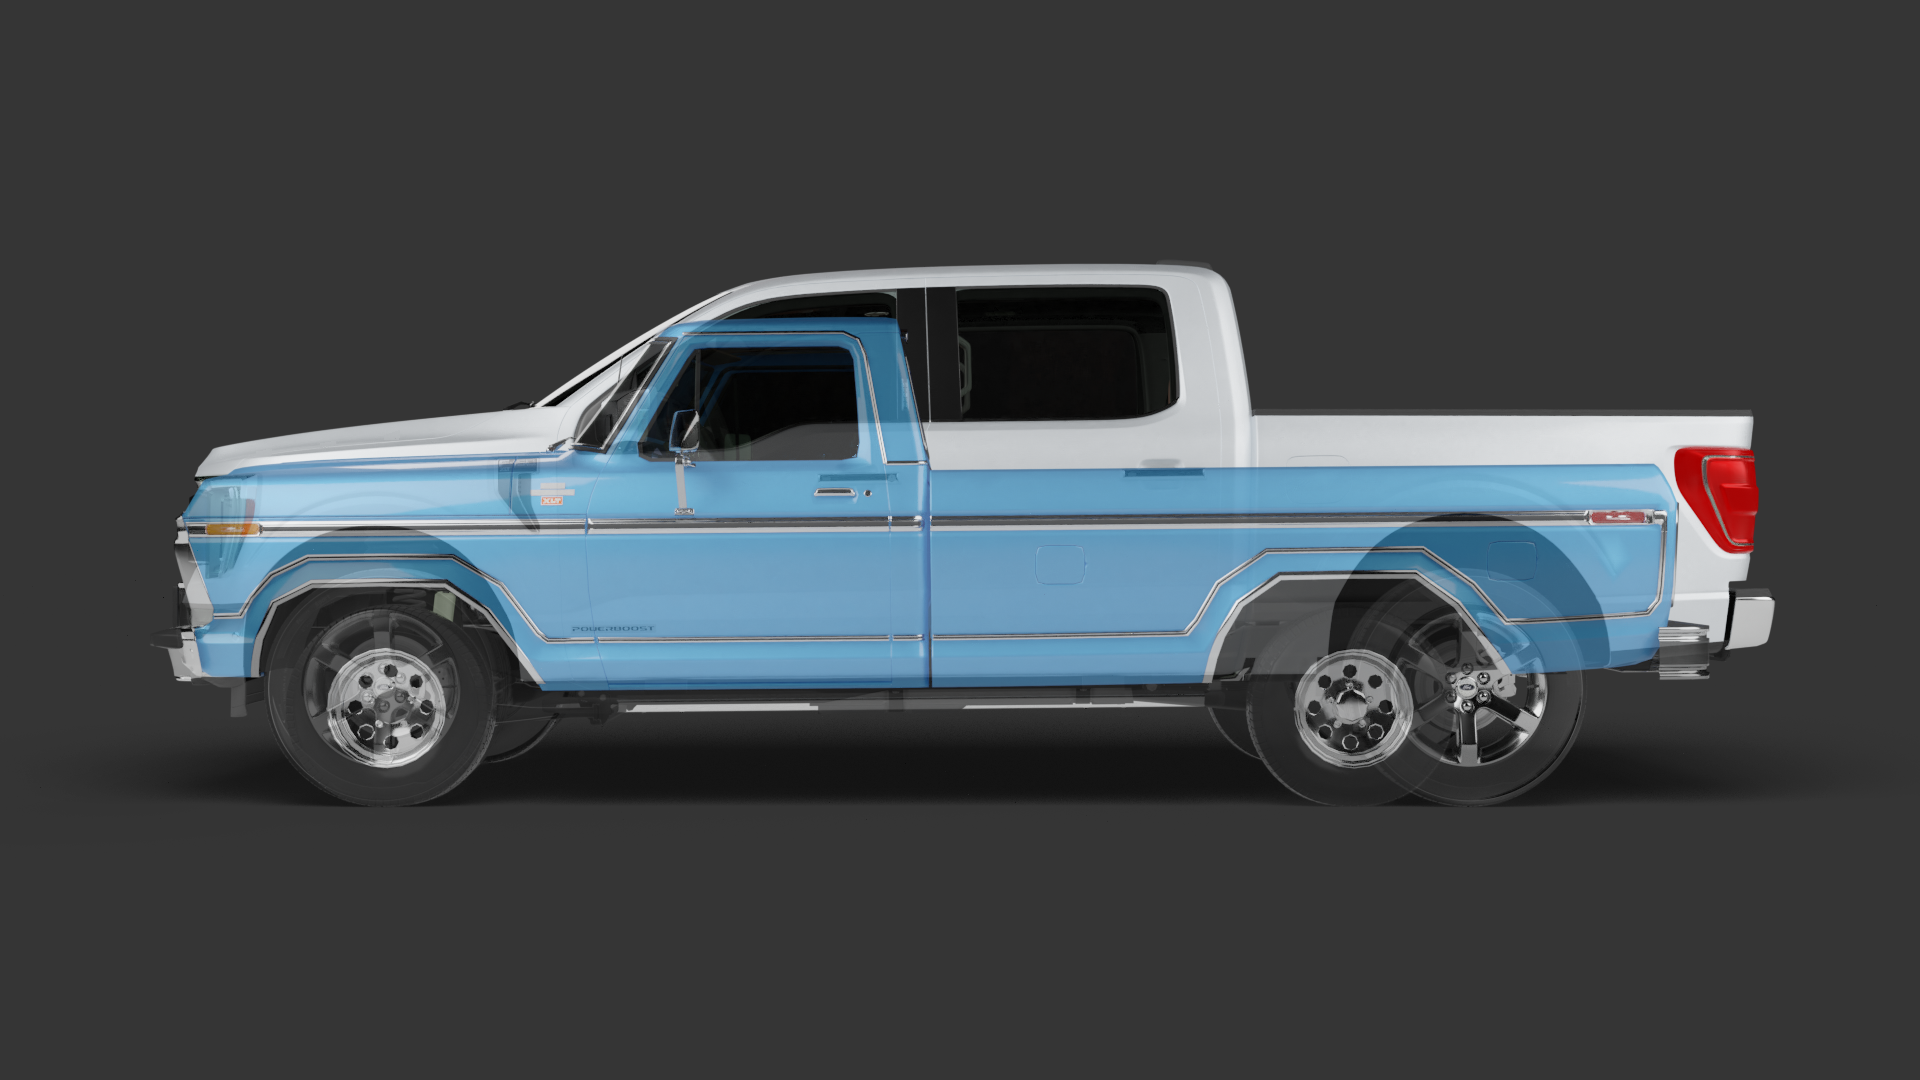 How pickup trucks got so big: Size, weight and safety